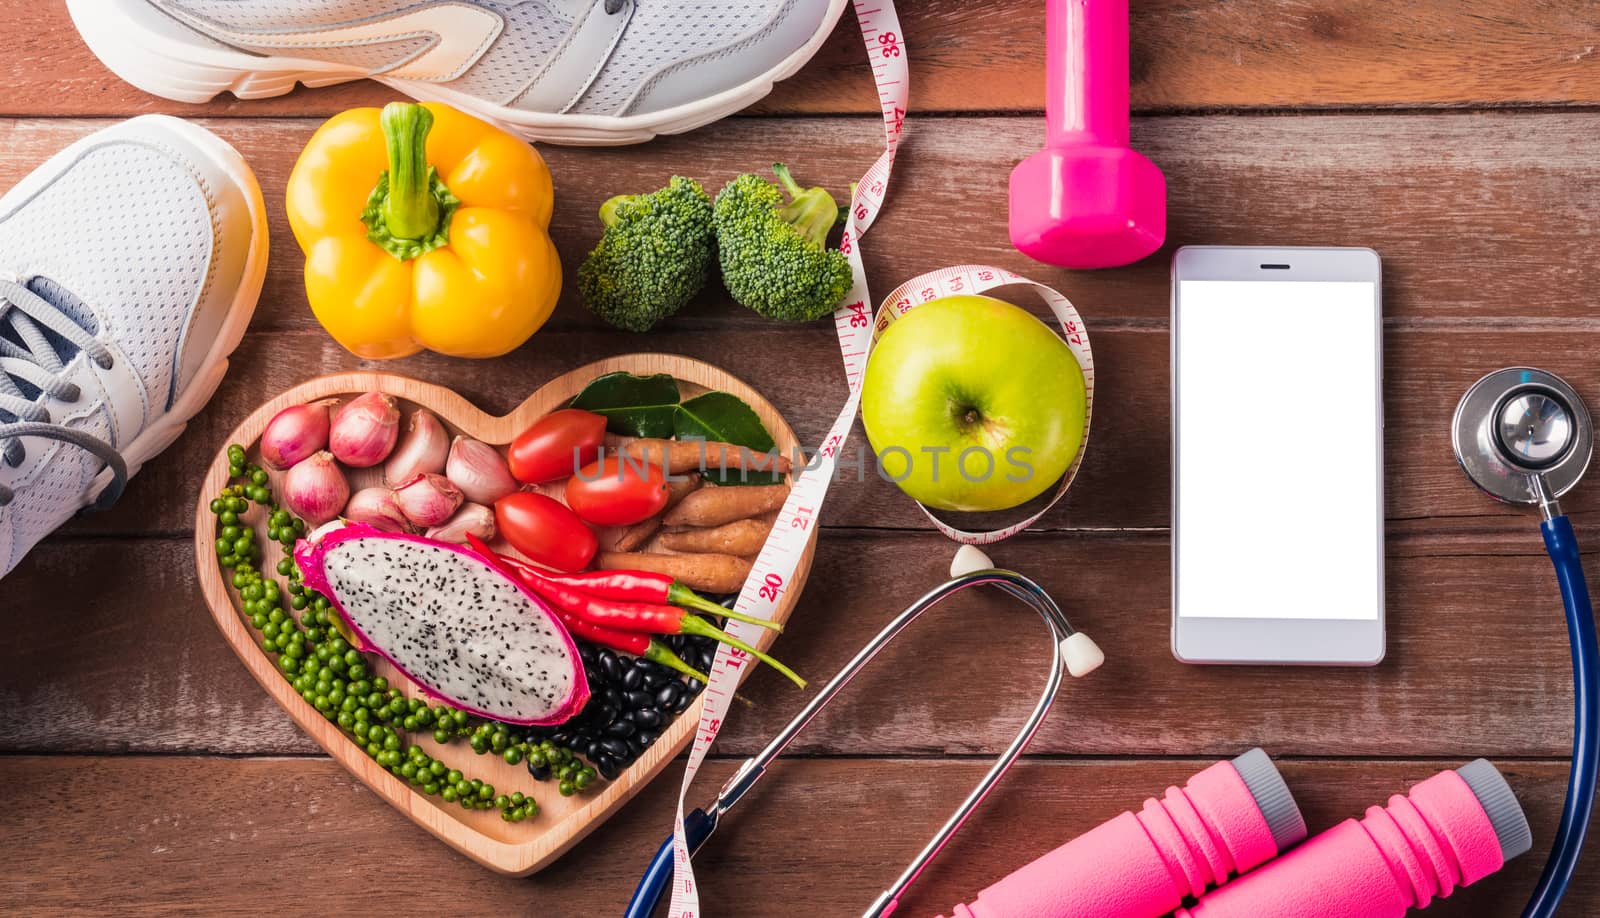 Top view of fresh organic fruit and vegetable in heart plate, shoes, sports equipment and doctor stethoscope, studio shot on wooden gym table, Healthy diet vegetarian food concept, World food day